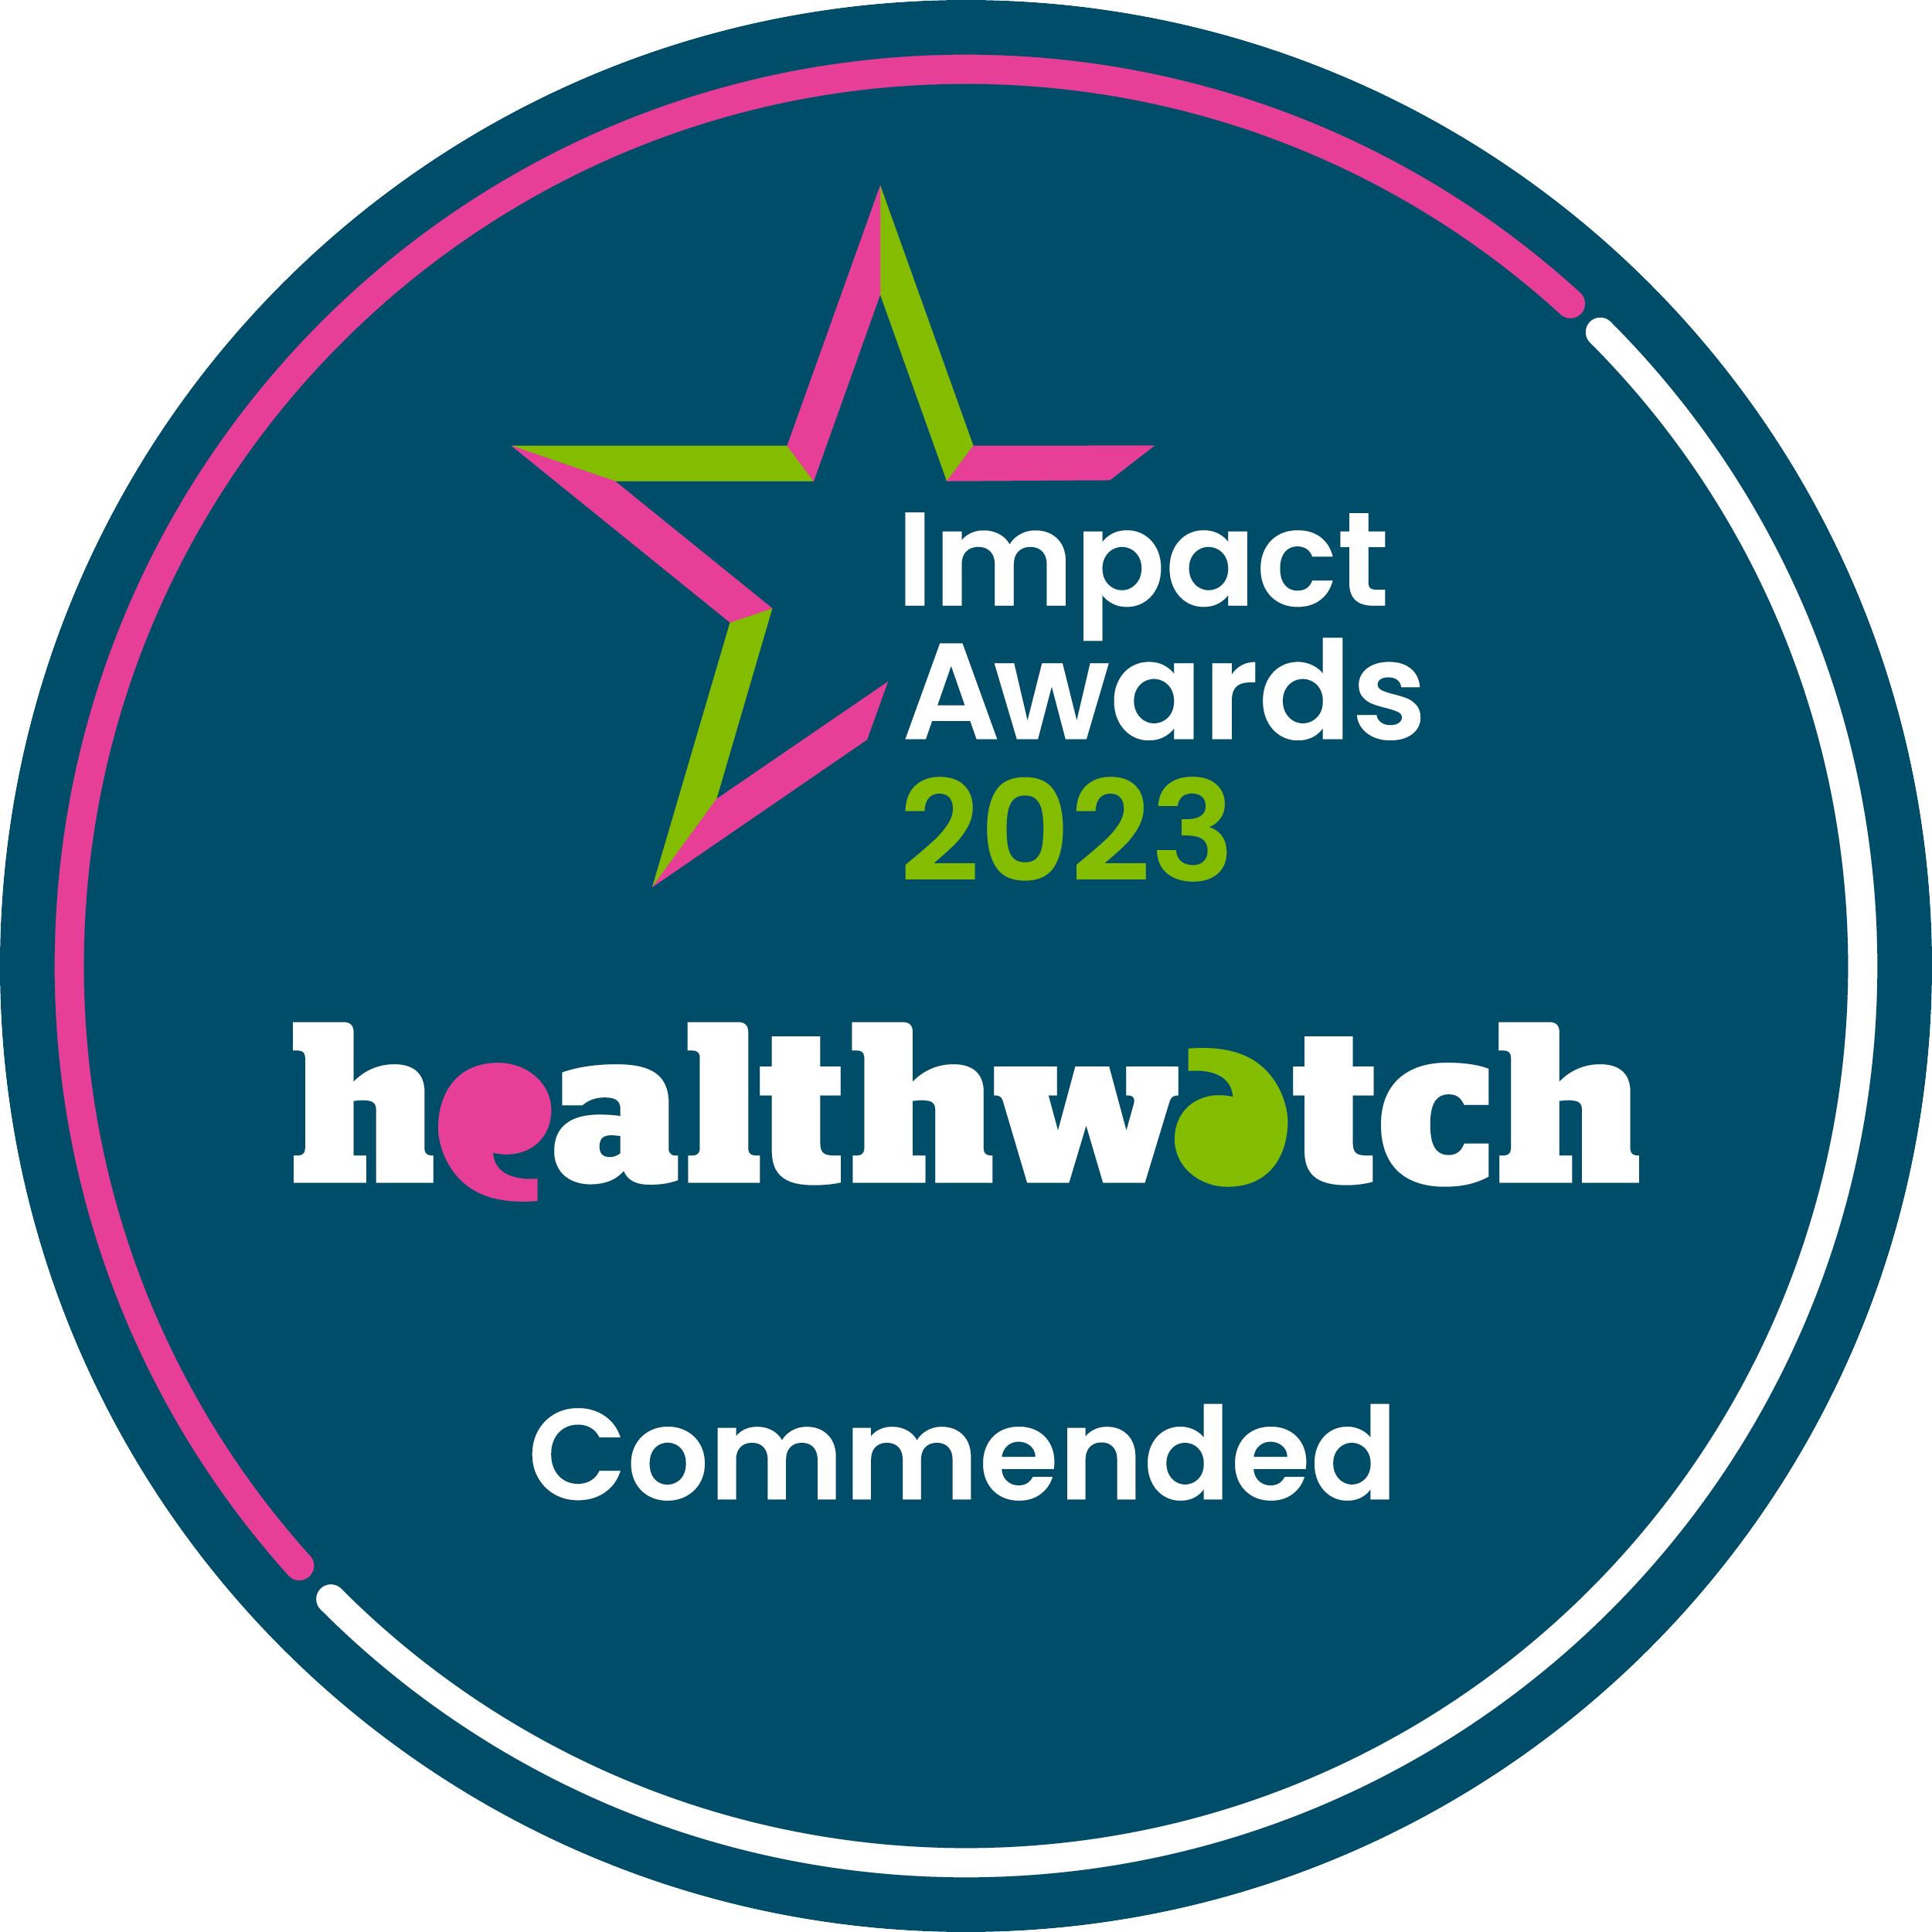 Within a circle, is a star with the words Impact Awards 2023. Underneath the star are the words Healthwatch and Commended.